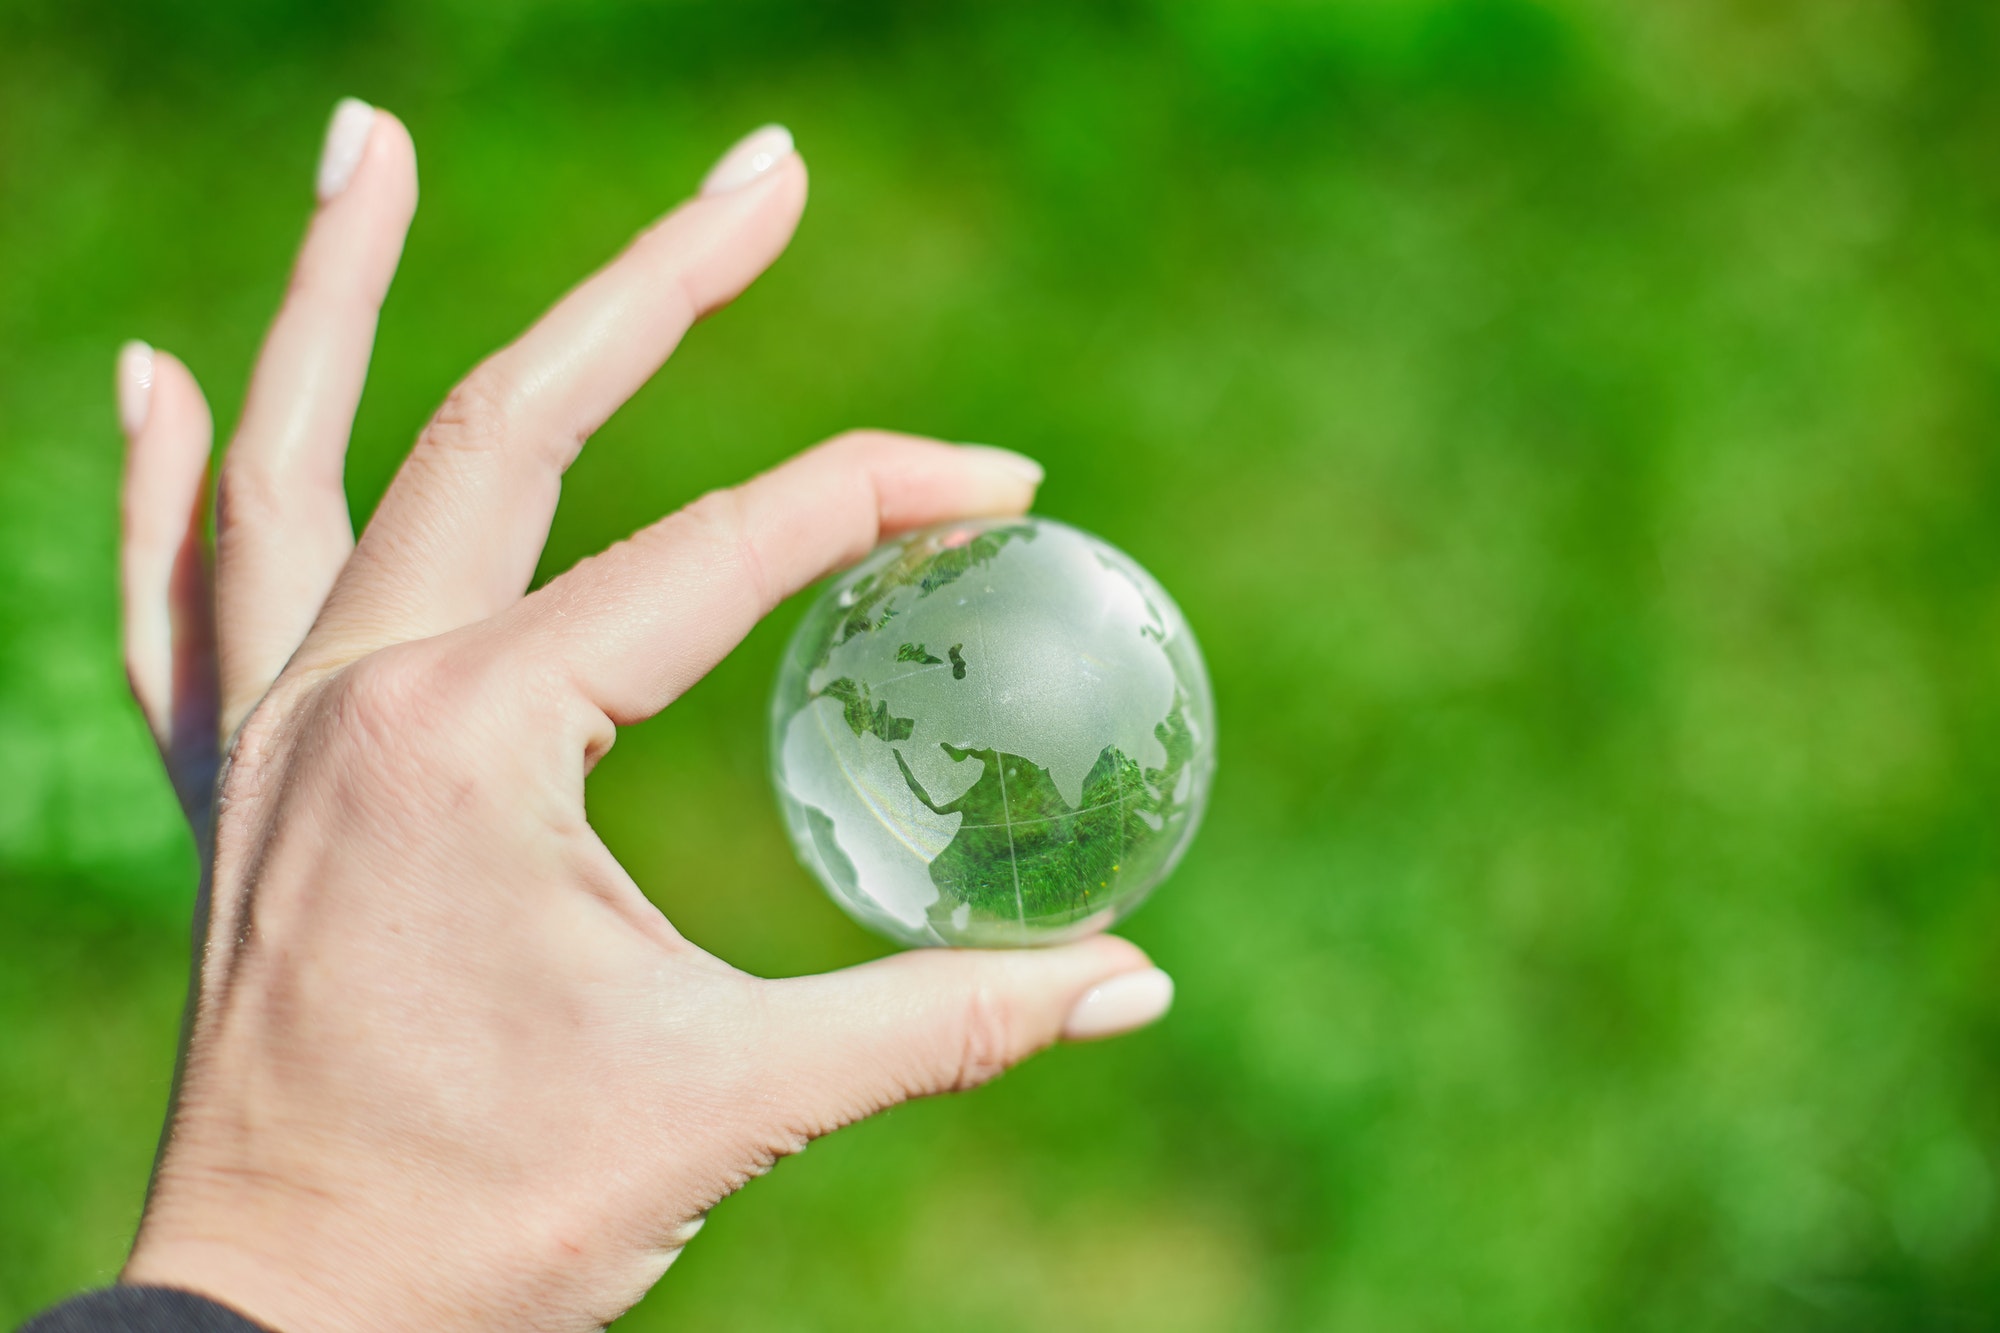 Human hand hold glass Earth globe on green grass background